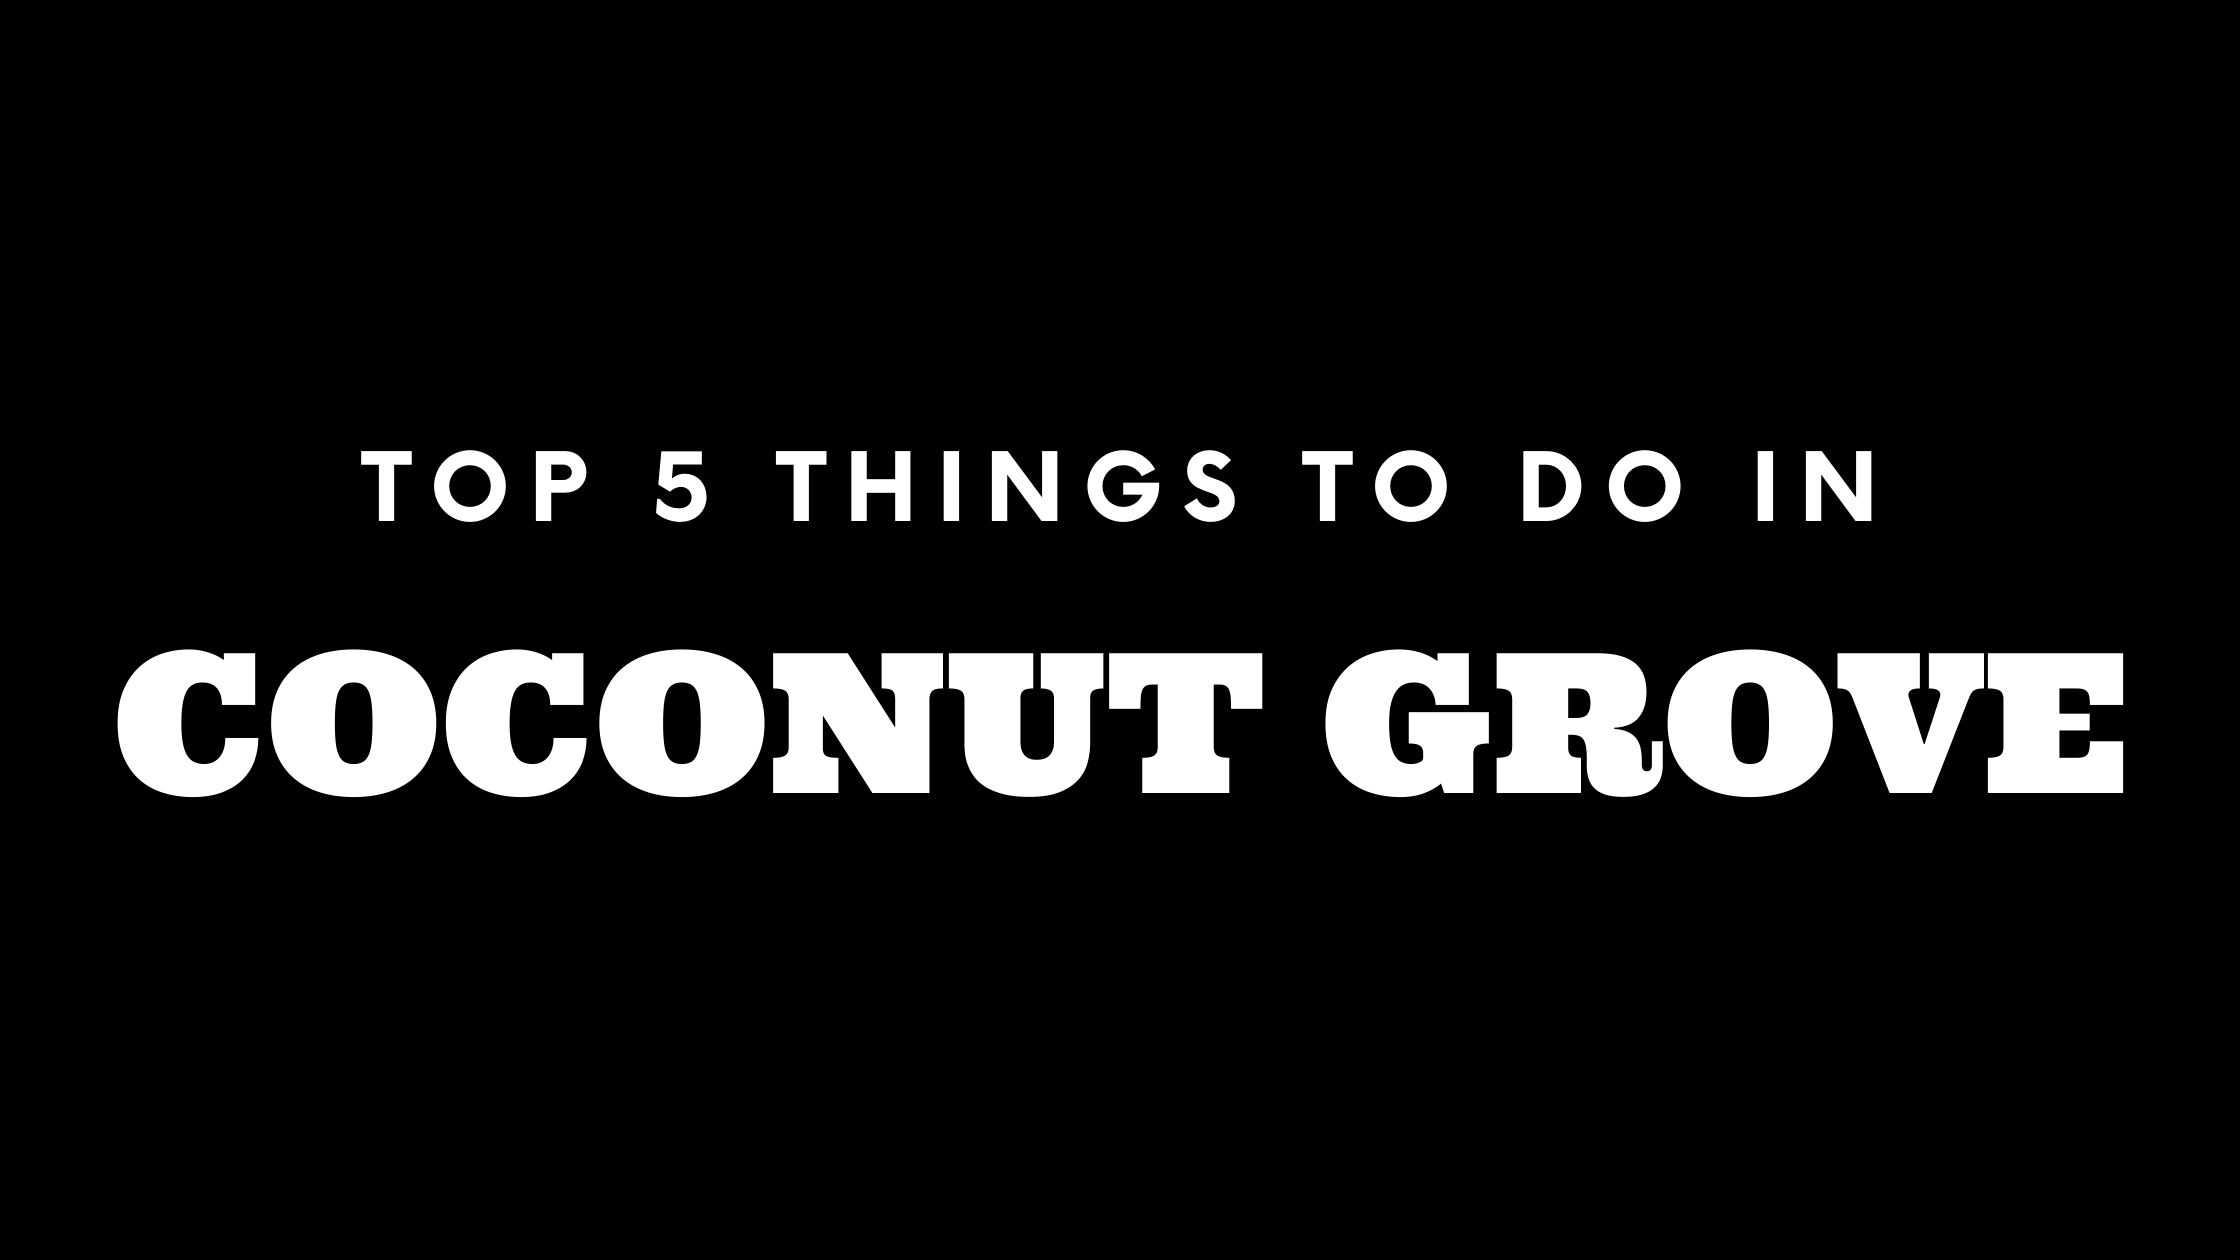 Top 5 Things To Do in Coconut Grove